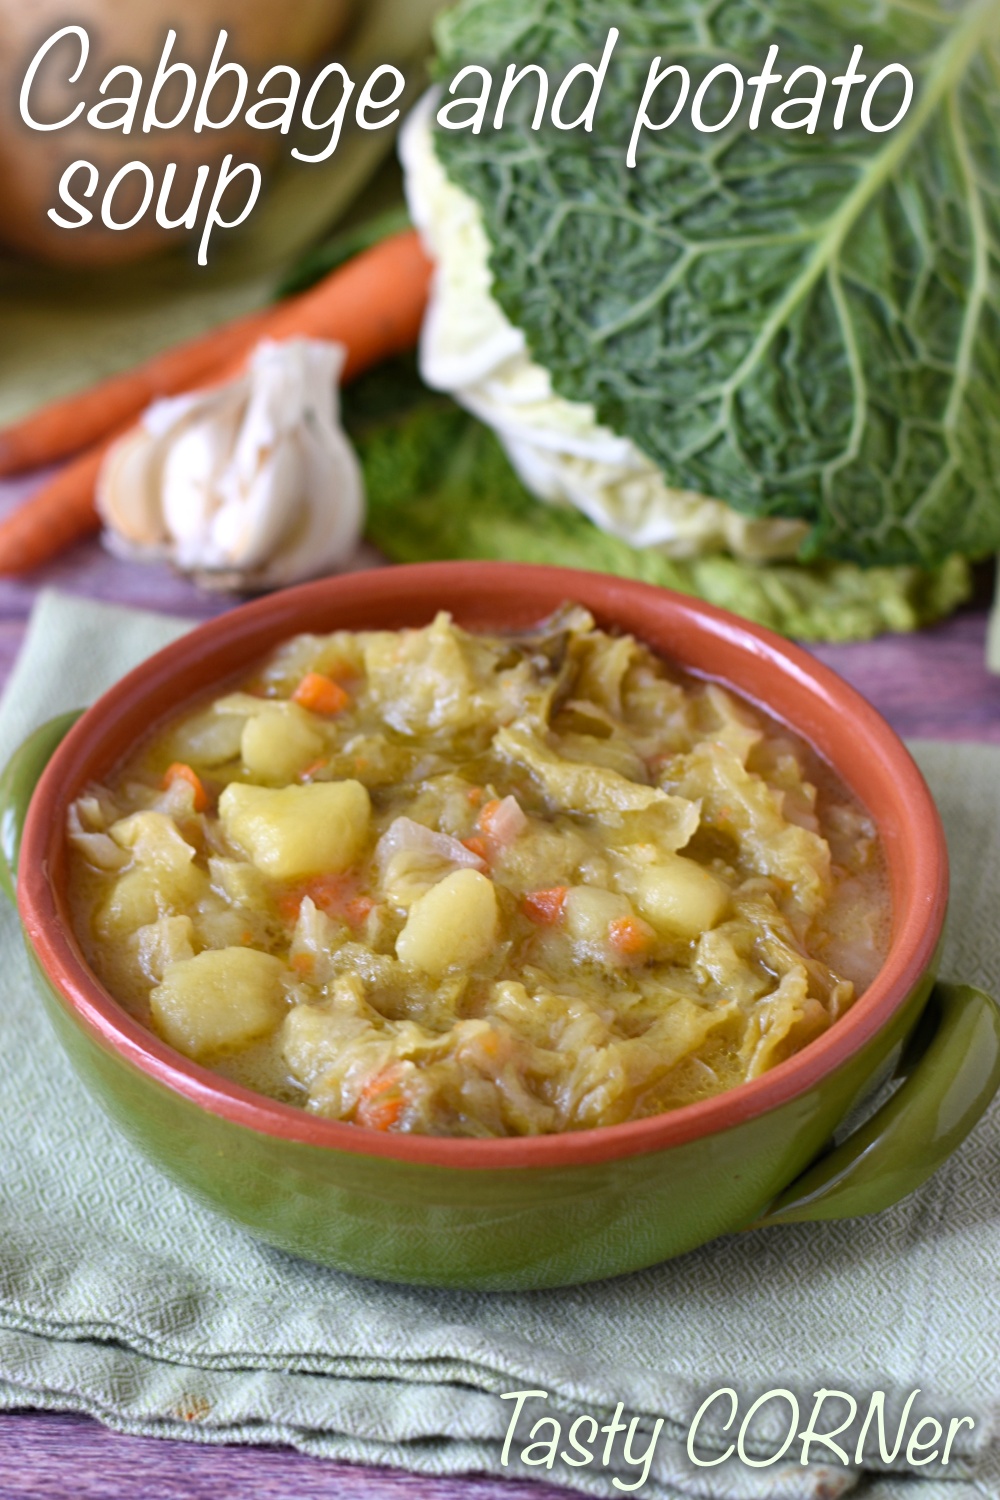 en_v_ cabbage and potato soup healthy recipe for a winter cozy vegetarian meal by tastycorner